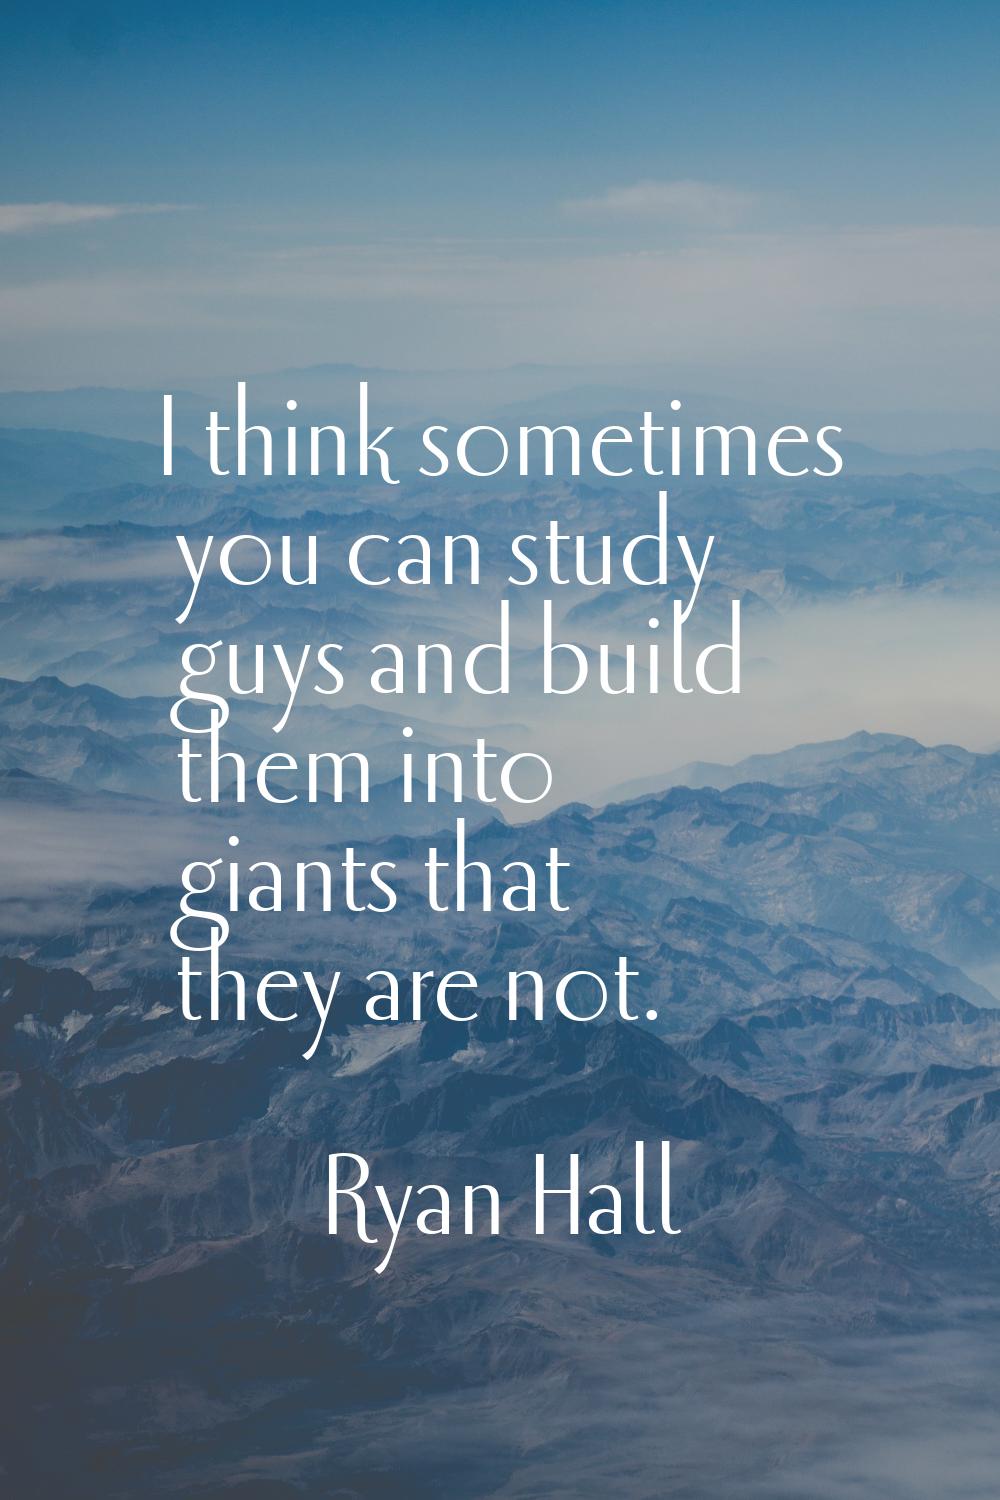 I think sometimes you can study guys and build them into giants that they are not.